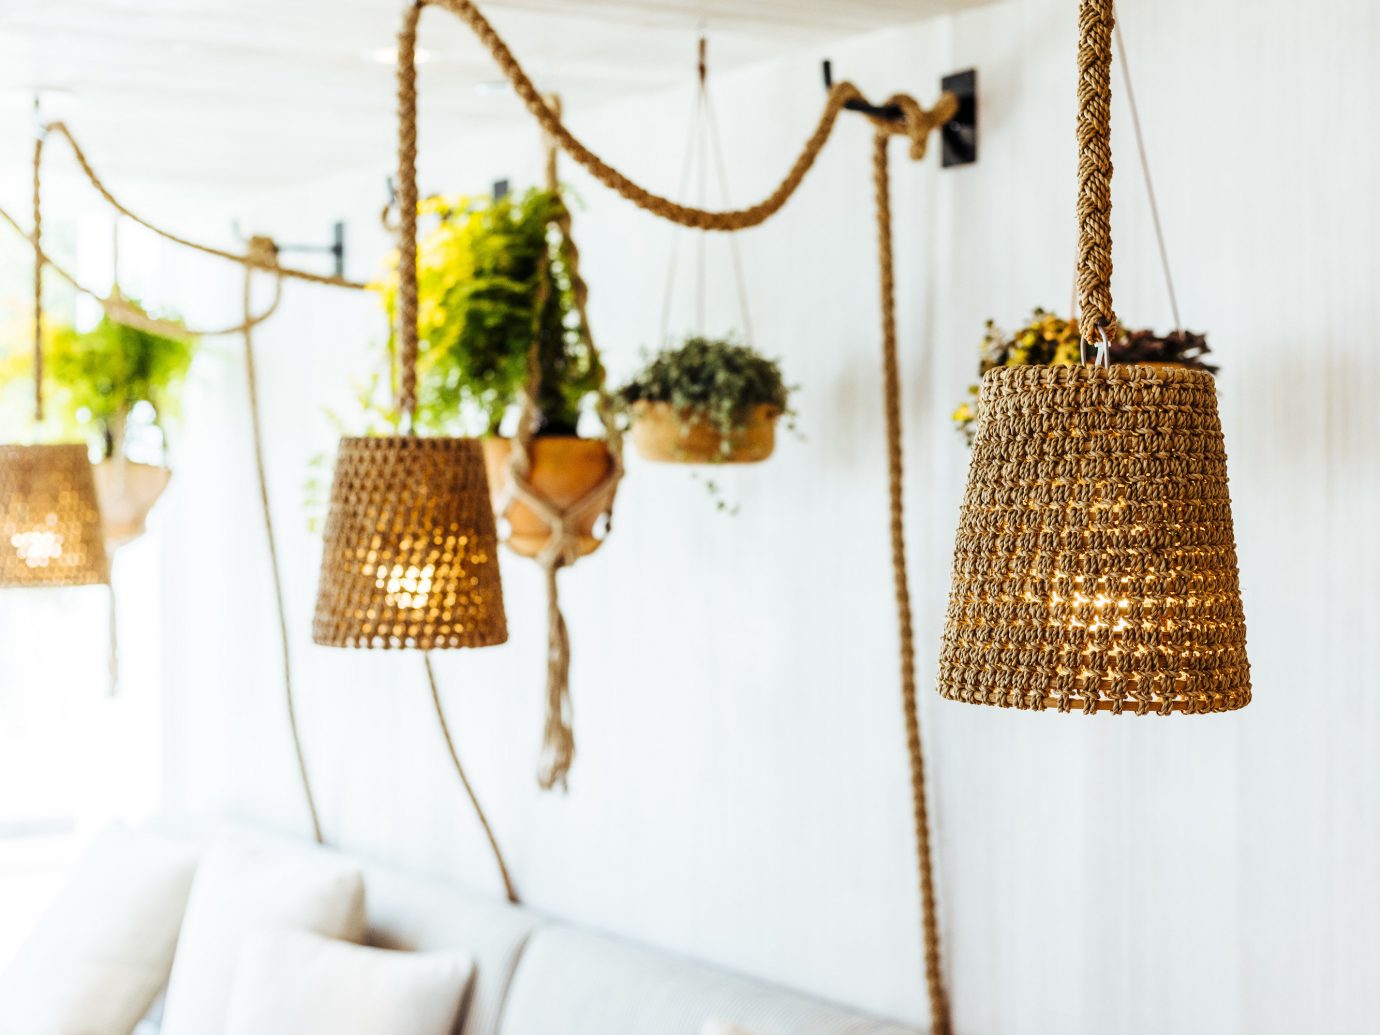 Food + Drink Girls Getaways Hotels Jetsetter Guides shopping Style + Design Weekend Getaways indoor yellow product design lighting accessory brass lamp lampshade furniture